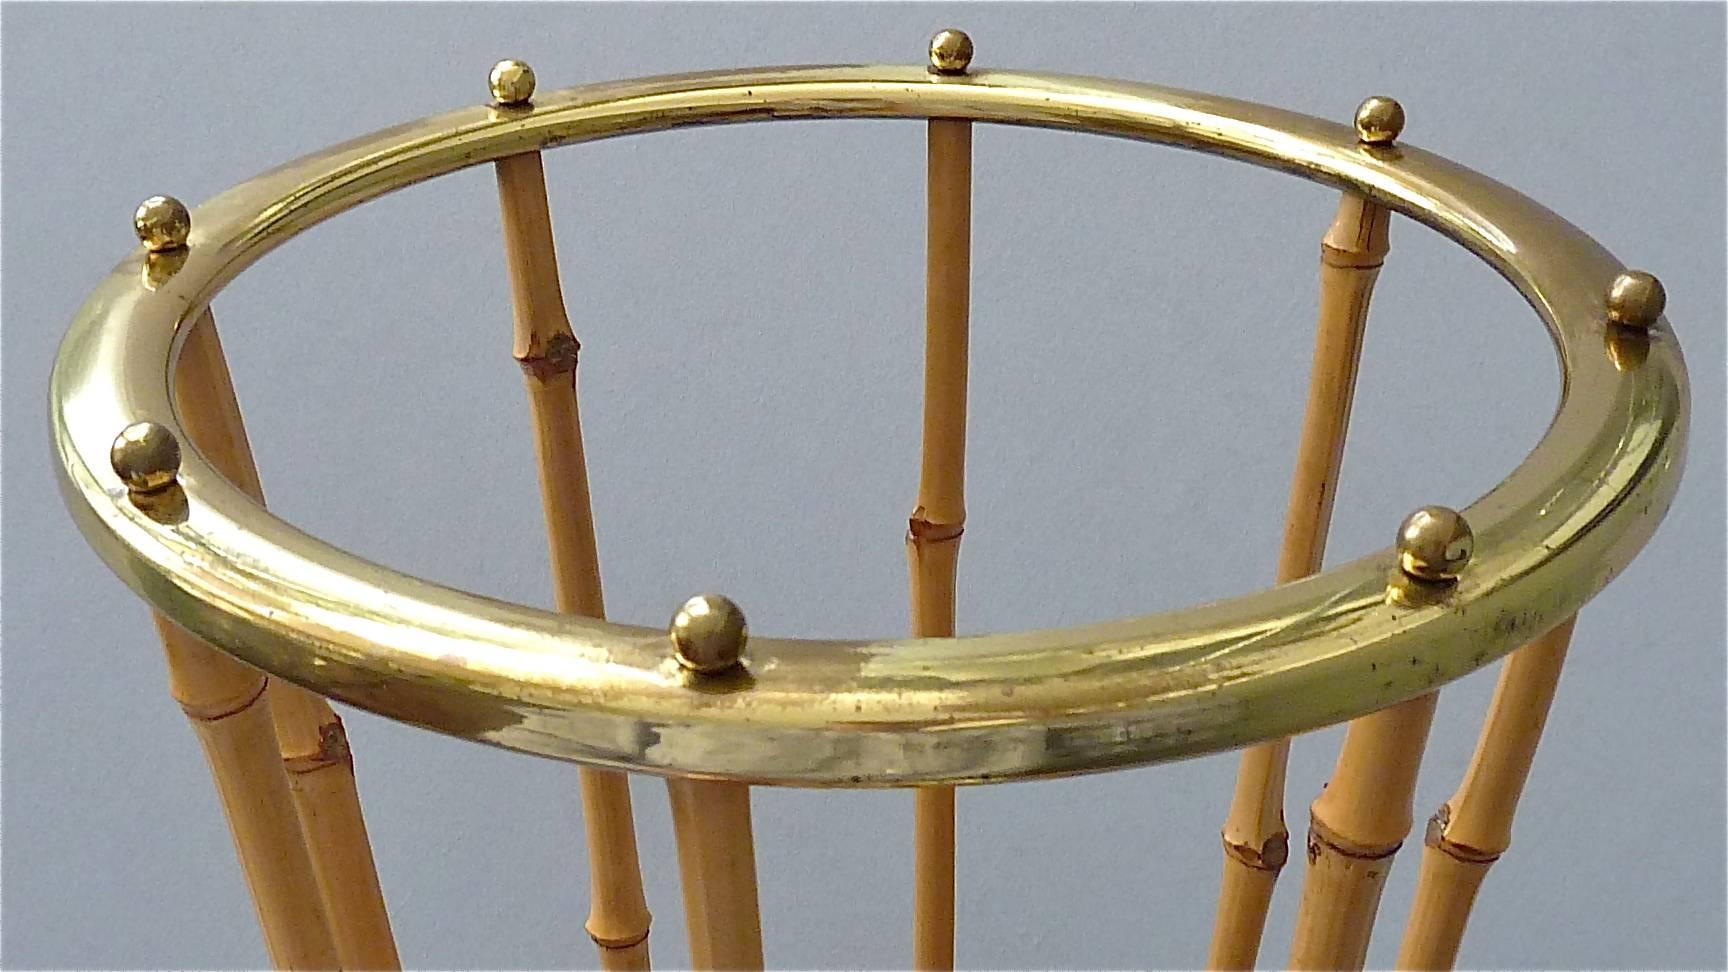 Midcentury Austrian Umbrella Stand Patinated Brass Bamboo Josef Frank Style 1950 For Sale 2